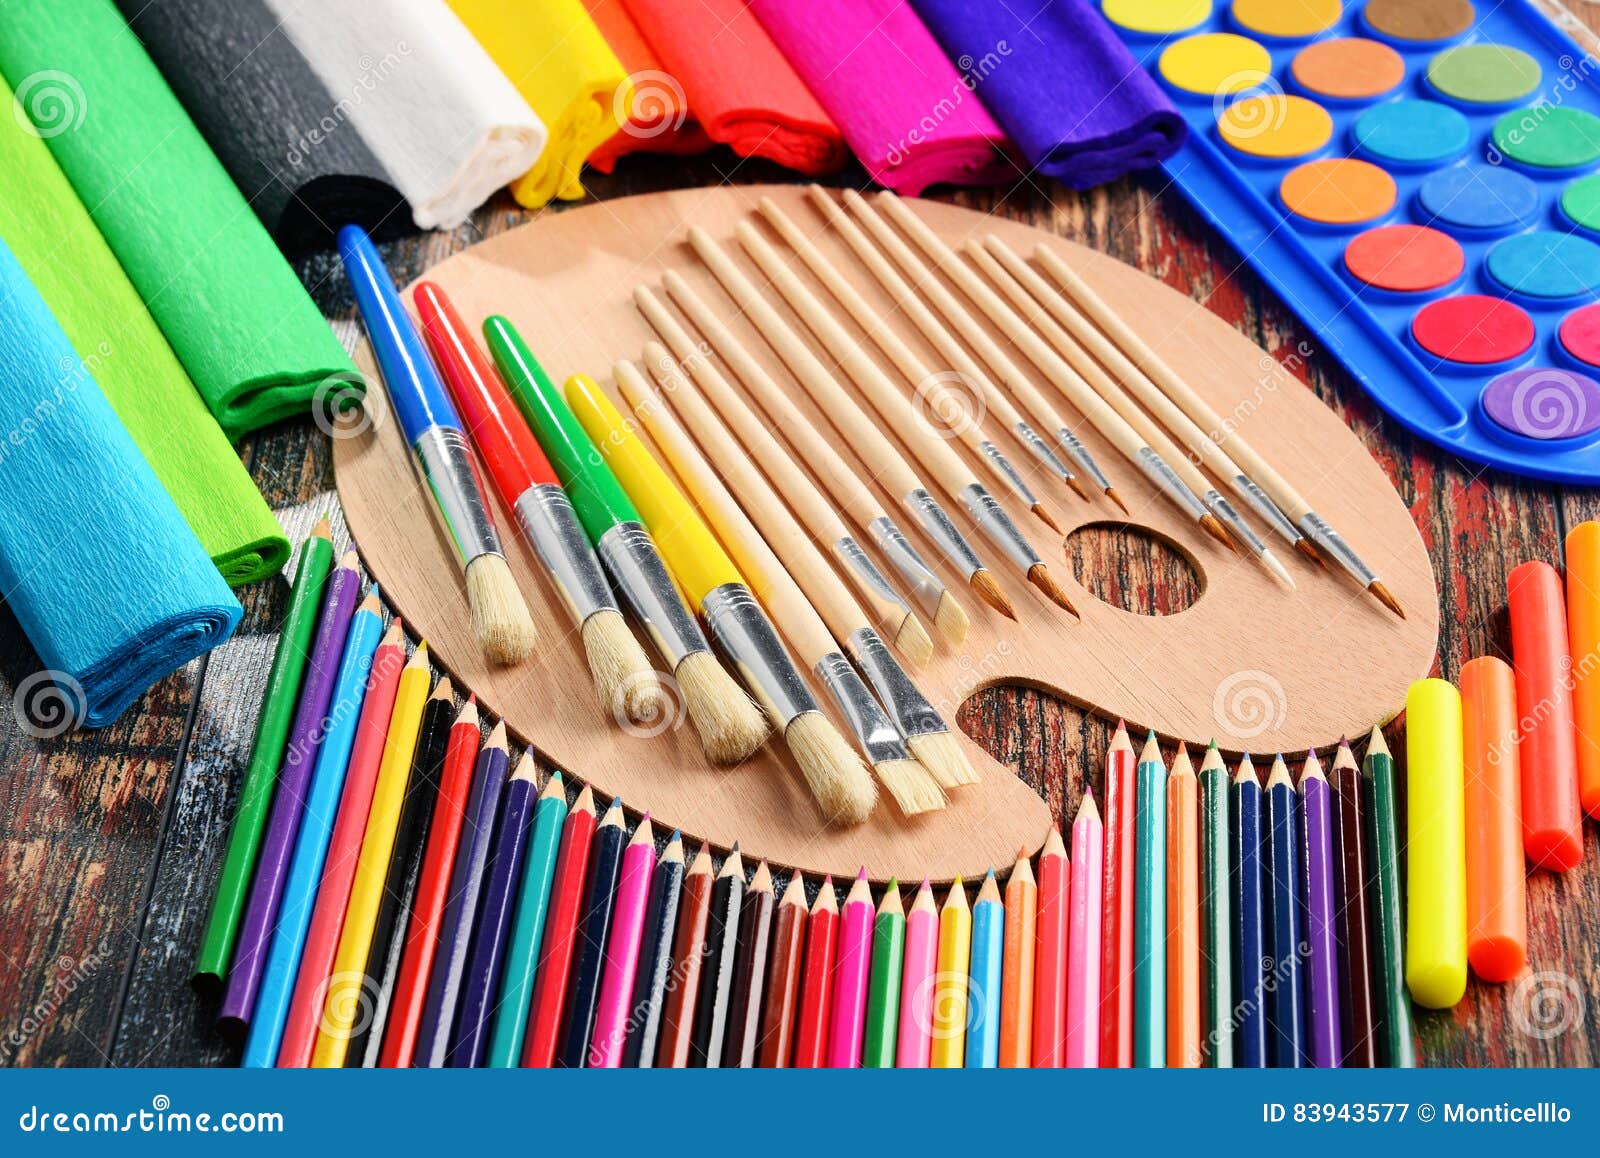 Composition With School Accessories For Painting And Drawing